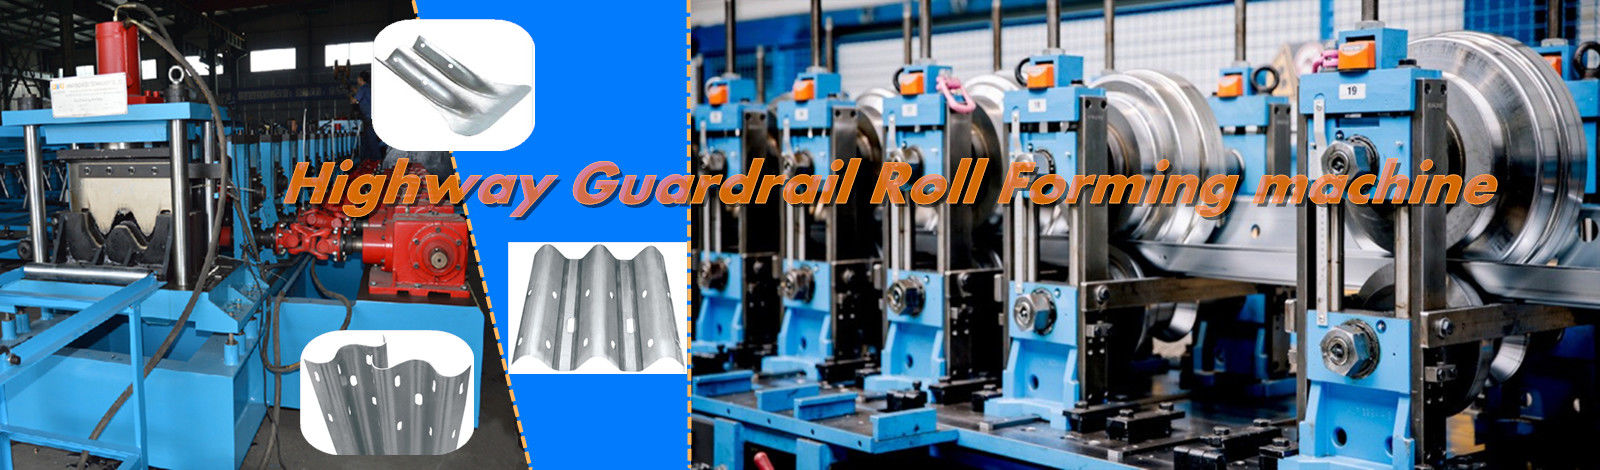 Highway Guardrail Roll Forming Machine , Sheet Metal Roll Forming Machines